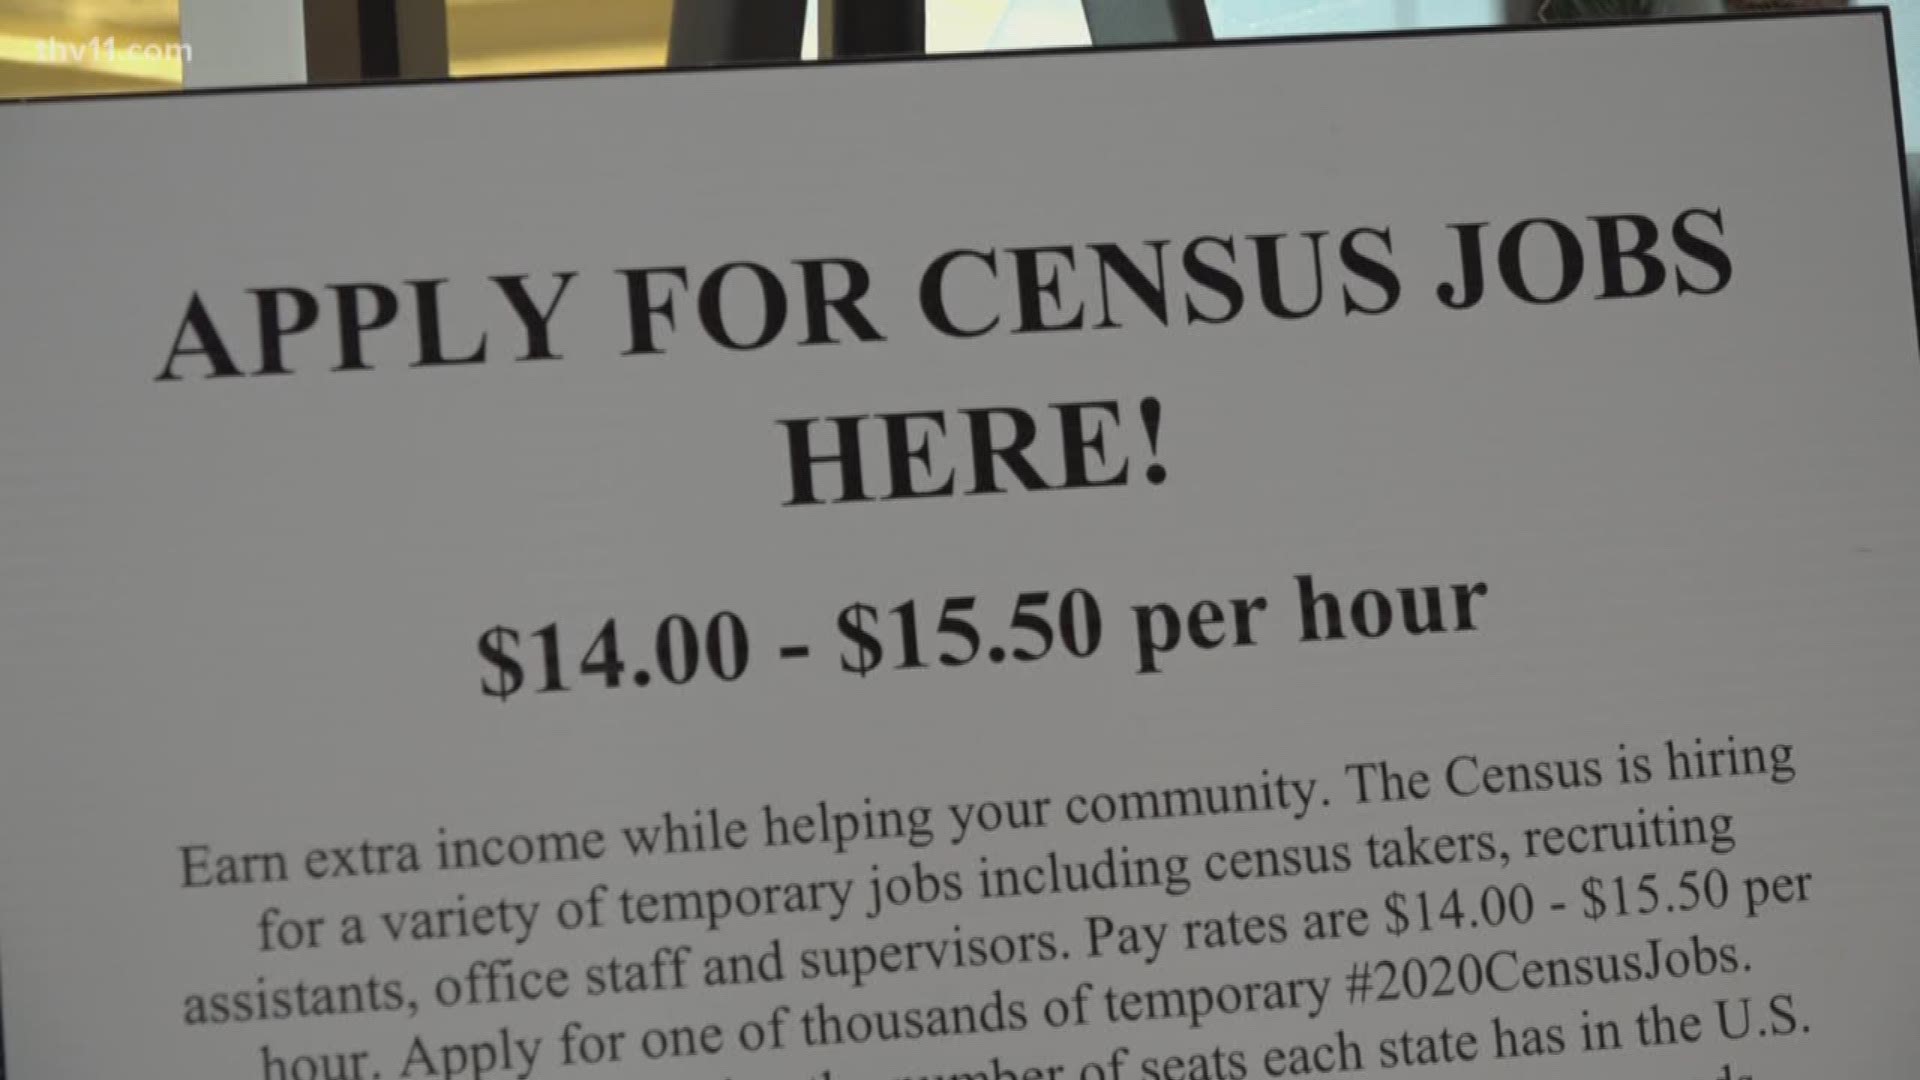 The interest of next year's census is already running high. The national ramifications of counting everybody in America have already played out this year.